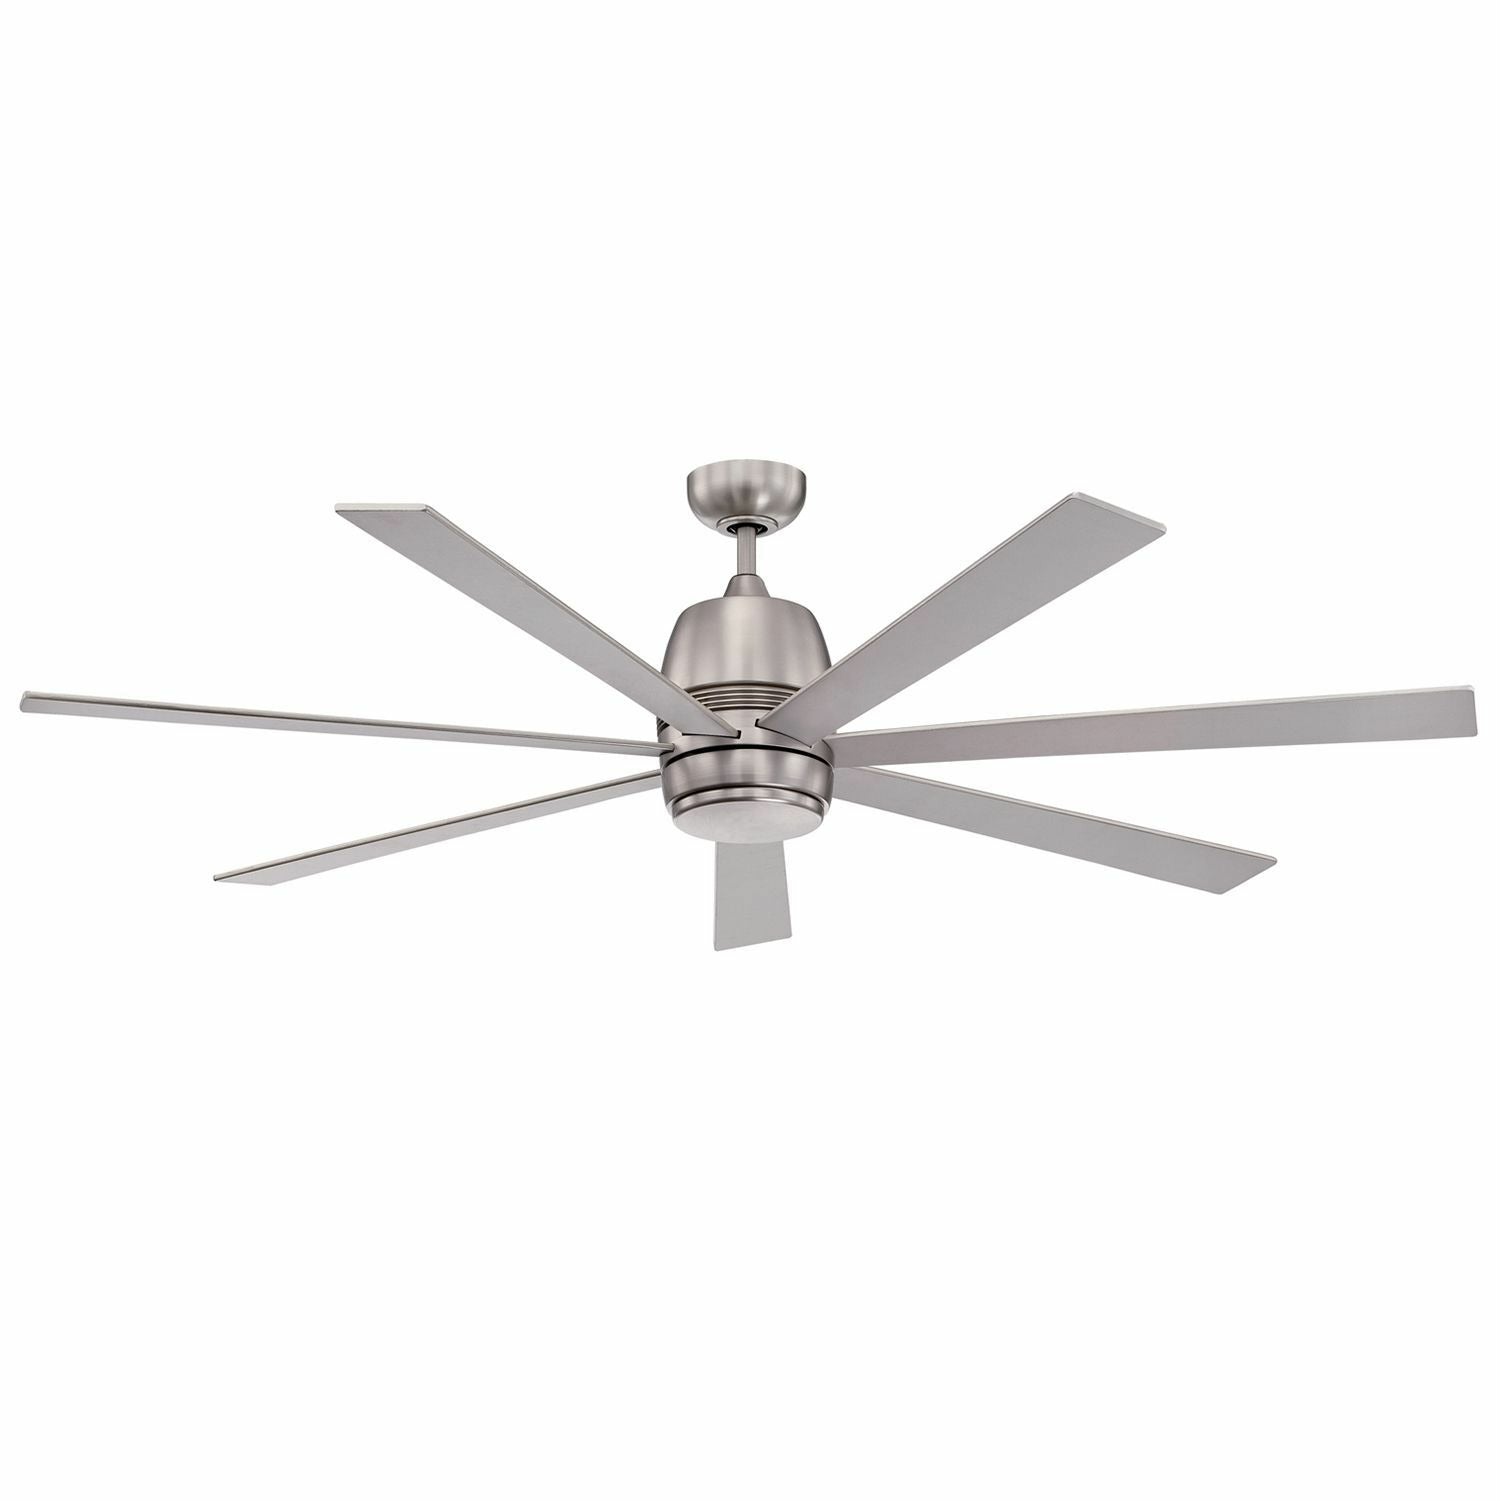 Sixty-Seven Ceiling Fan Satin Nickel with Silver blades